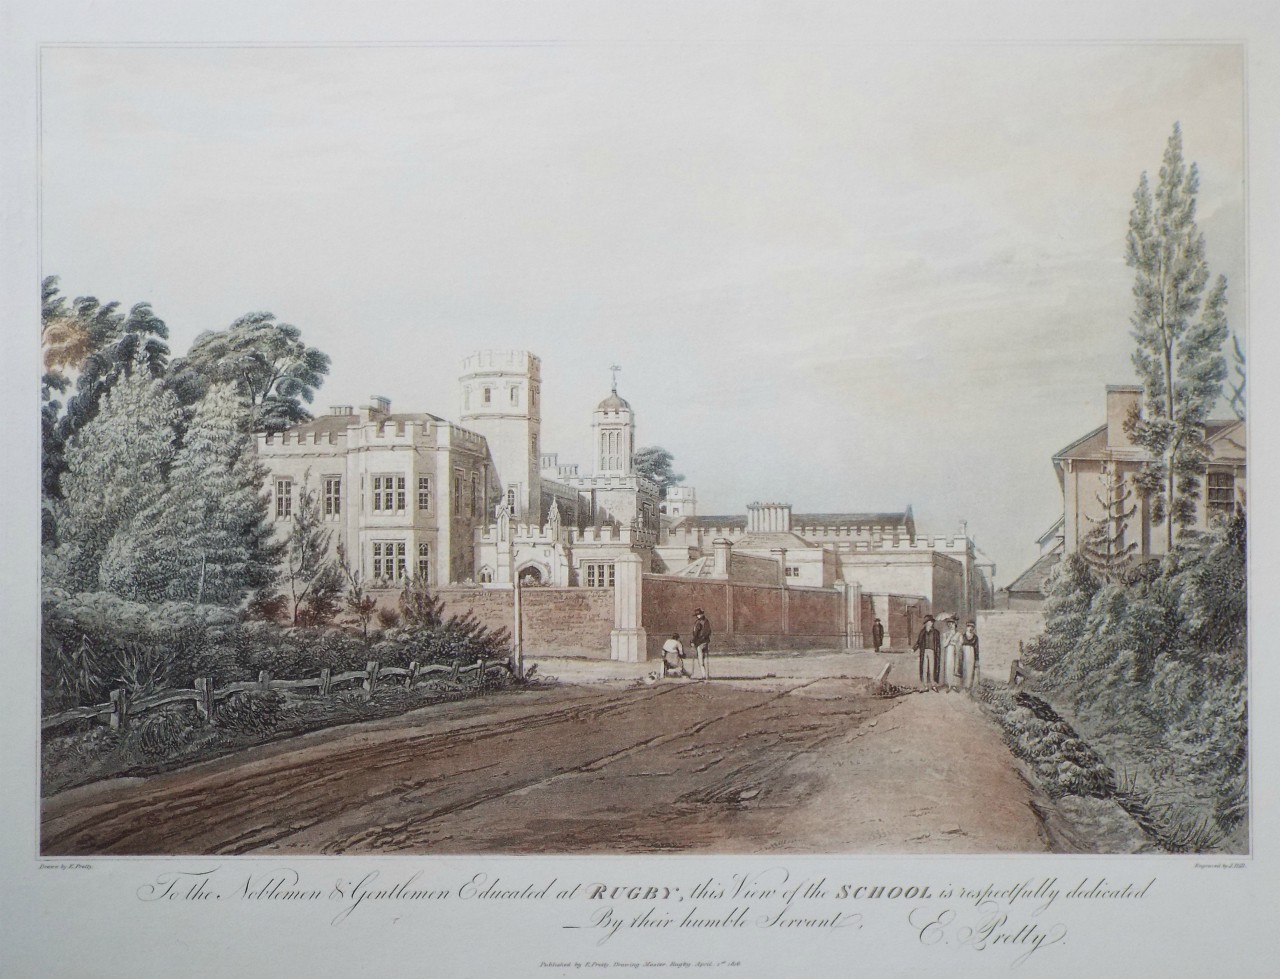 Aquatint - To the Noblemen & Gentleman educated at Rugby, this view of the School is respectfully dedicated by their humble servant E. Pretty. - Hill